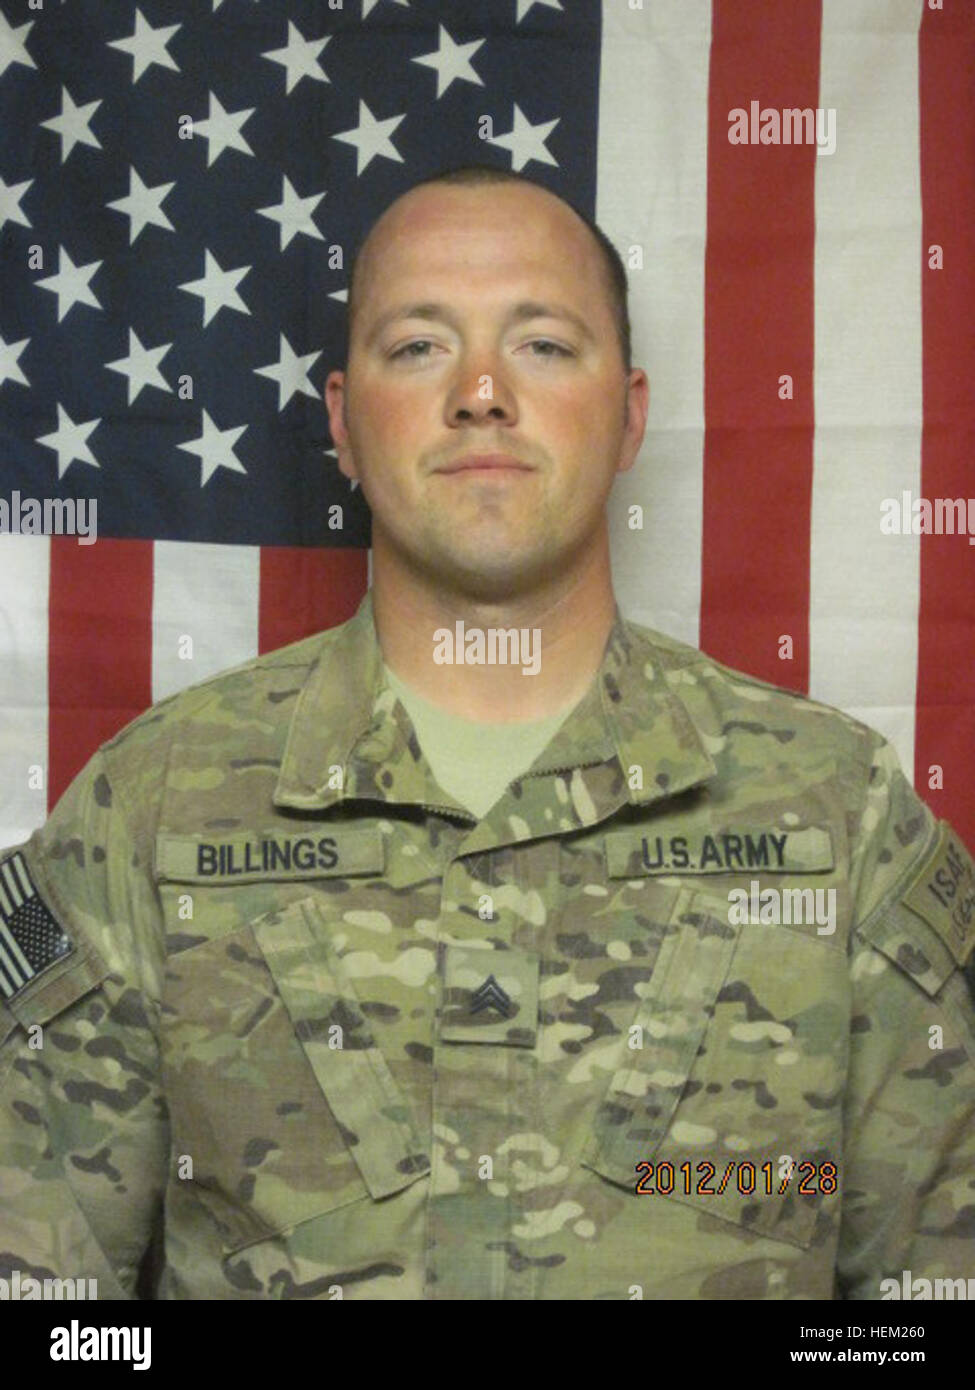 An image of U.S. Army Sgt. Robert J. Billings, a Clarksville, Va., native, who died Oct. 13,2012 in Spin Boldak, Kandahar province, Afghanistan, of wounds caused by an improvised explosive device. He was assigned to 5th Battalion, 20th Infantry Regiment, 3rd Stryker Brigade Combat Team, 2nd Infantry Division, Joint Base Lewis-McChord. (U.S. Army Courtesy photo/Released) 'Quiet professional' remembered as loving family man, dedicated soldier 779807 Stock Photo